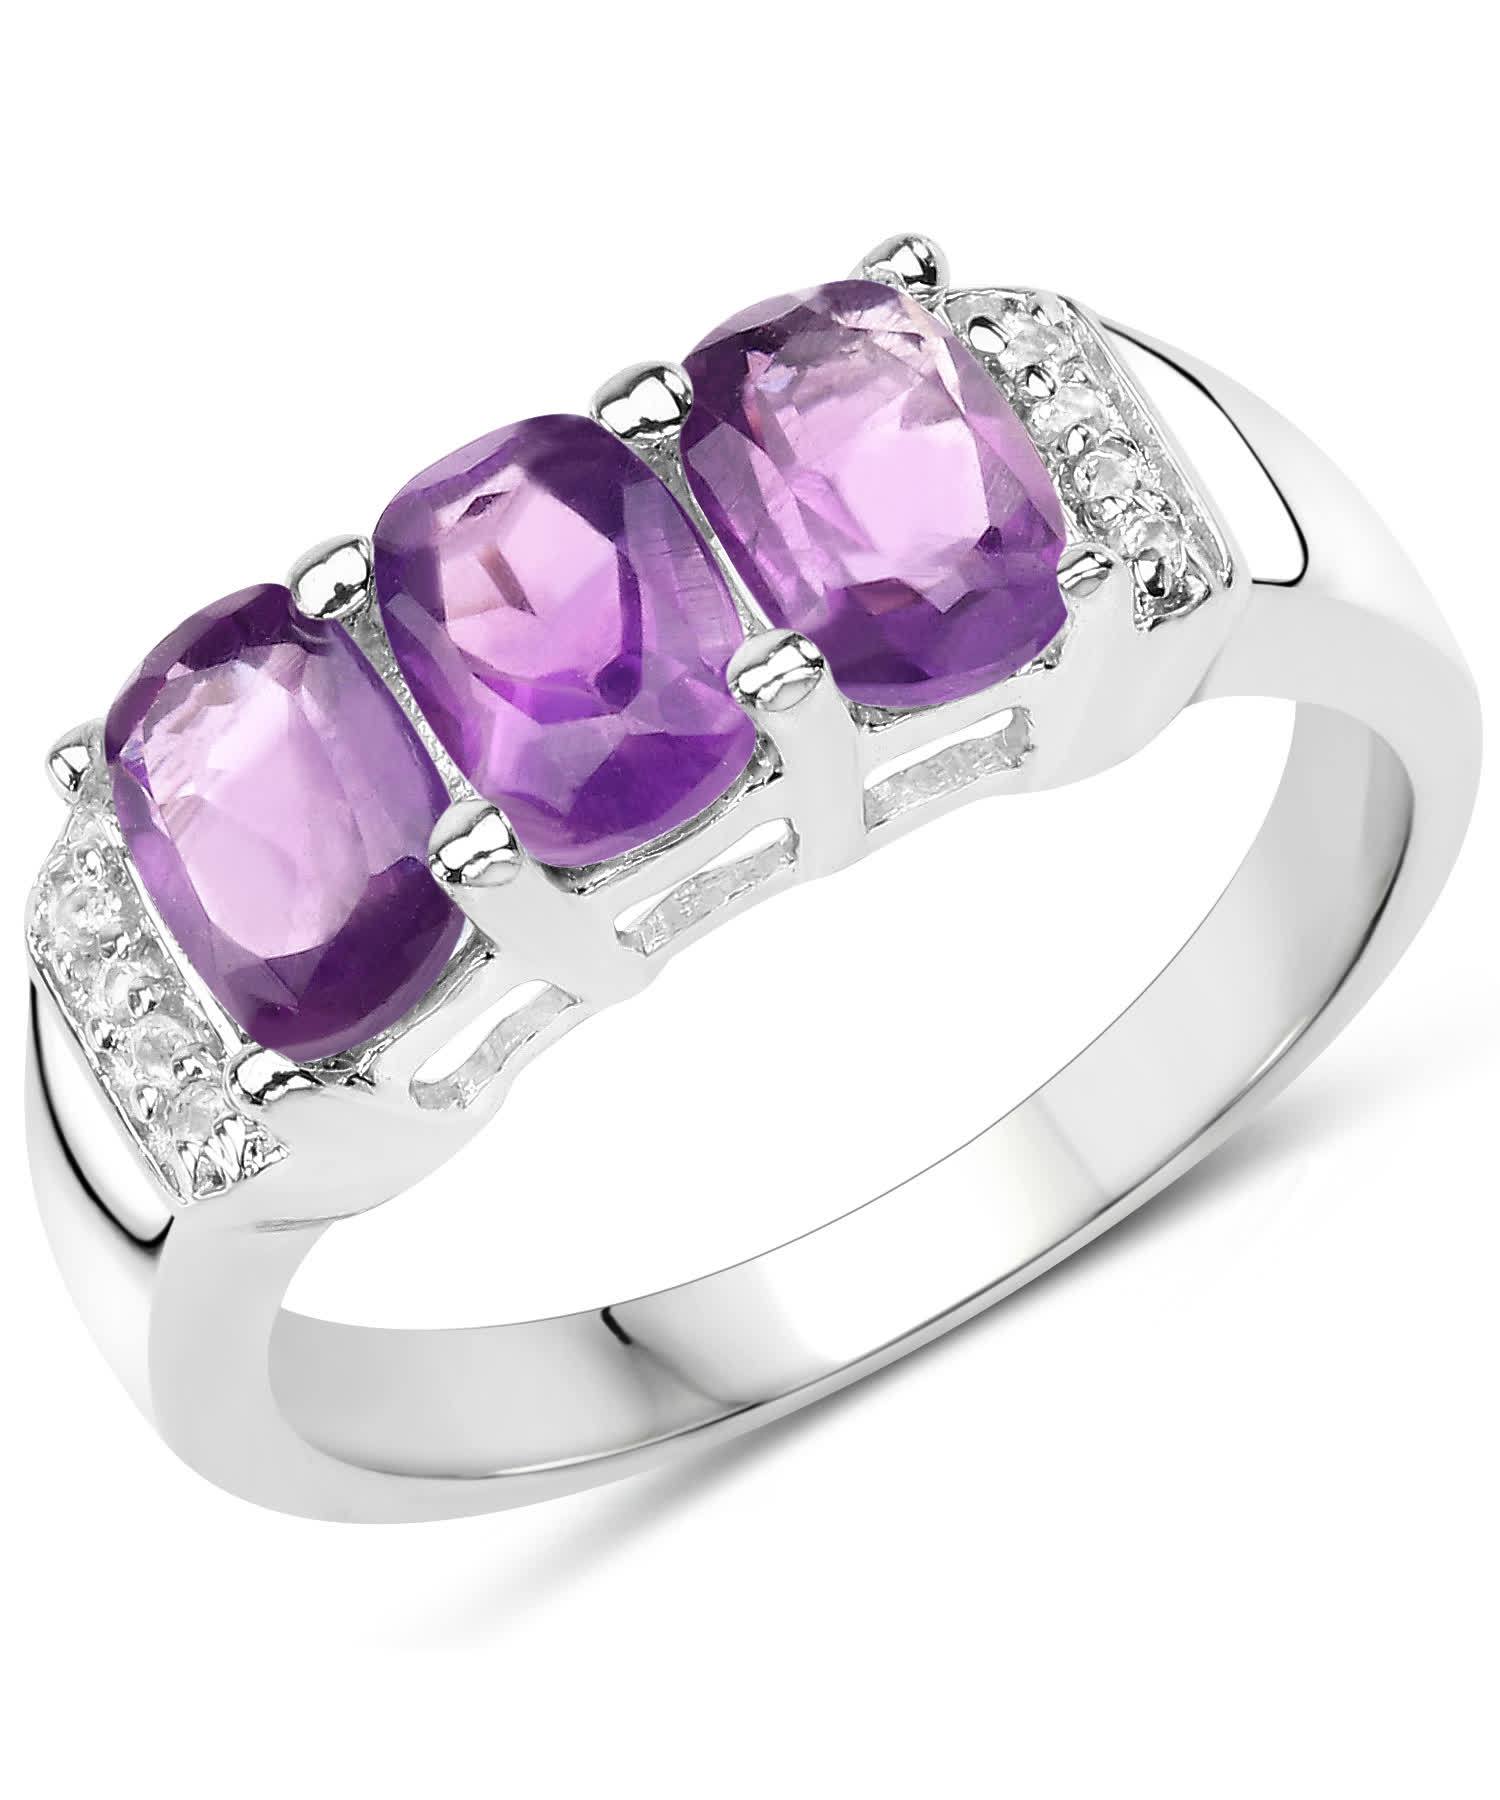 1.54ctw Natural Amethyst and Topaz Rhodium Plated 925 Sterling Silver Three-Stone Right Hand Ring View 1